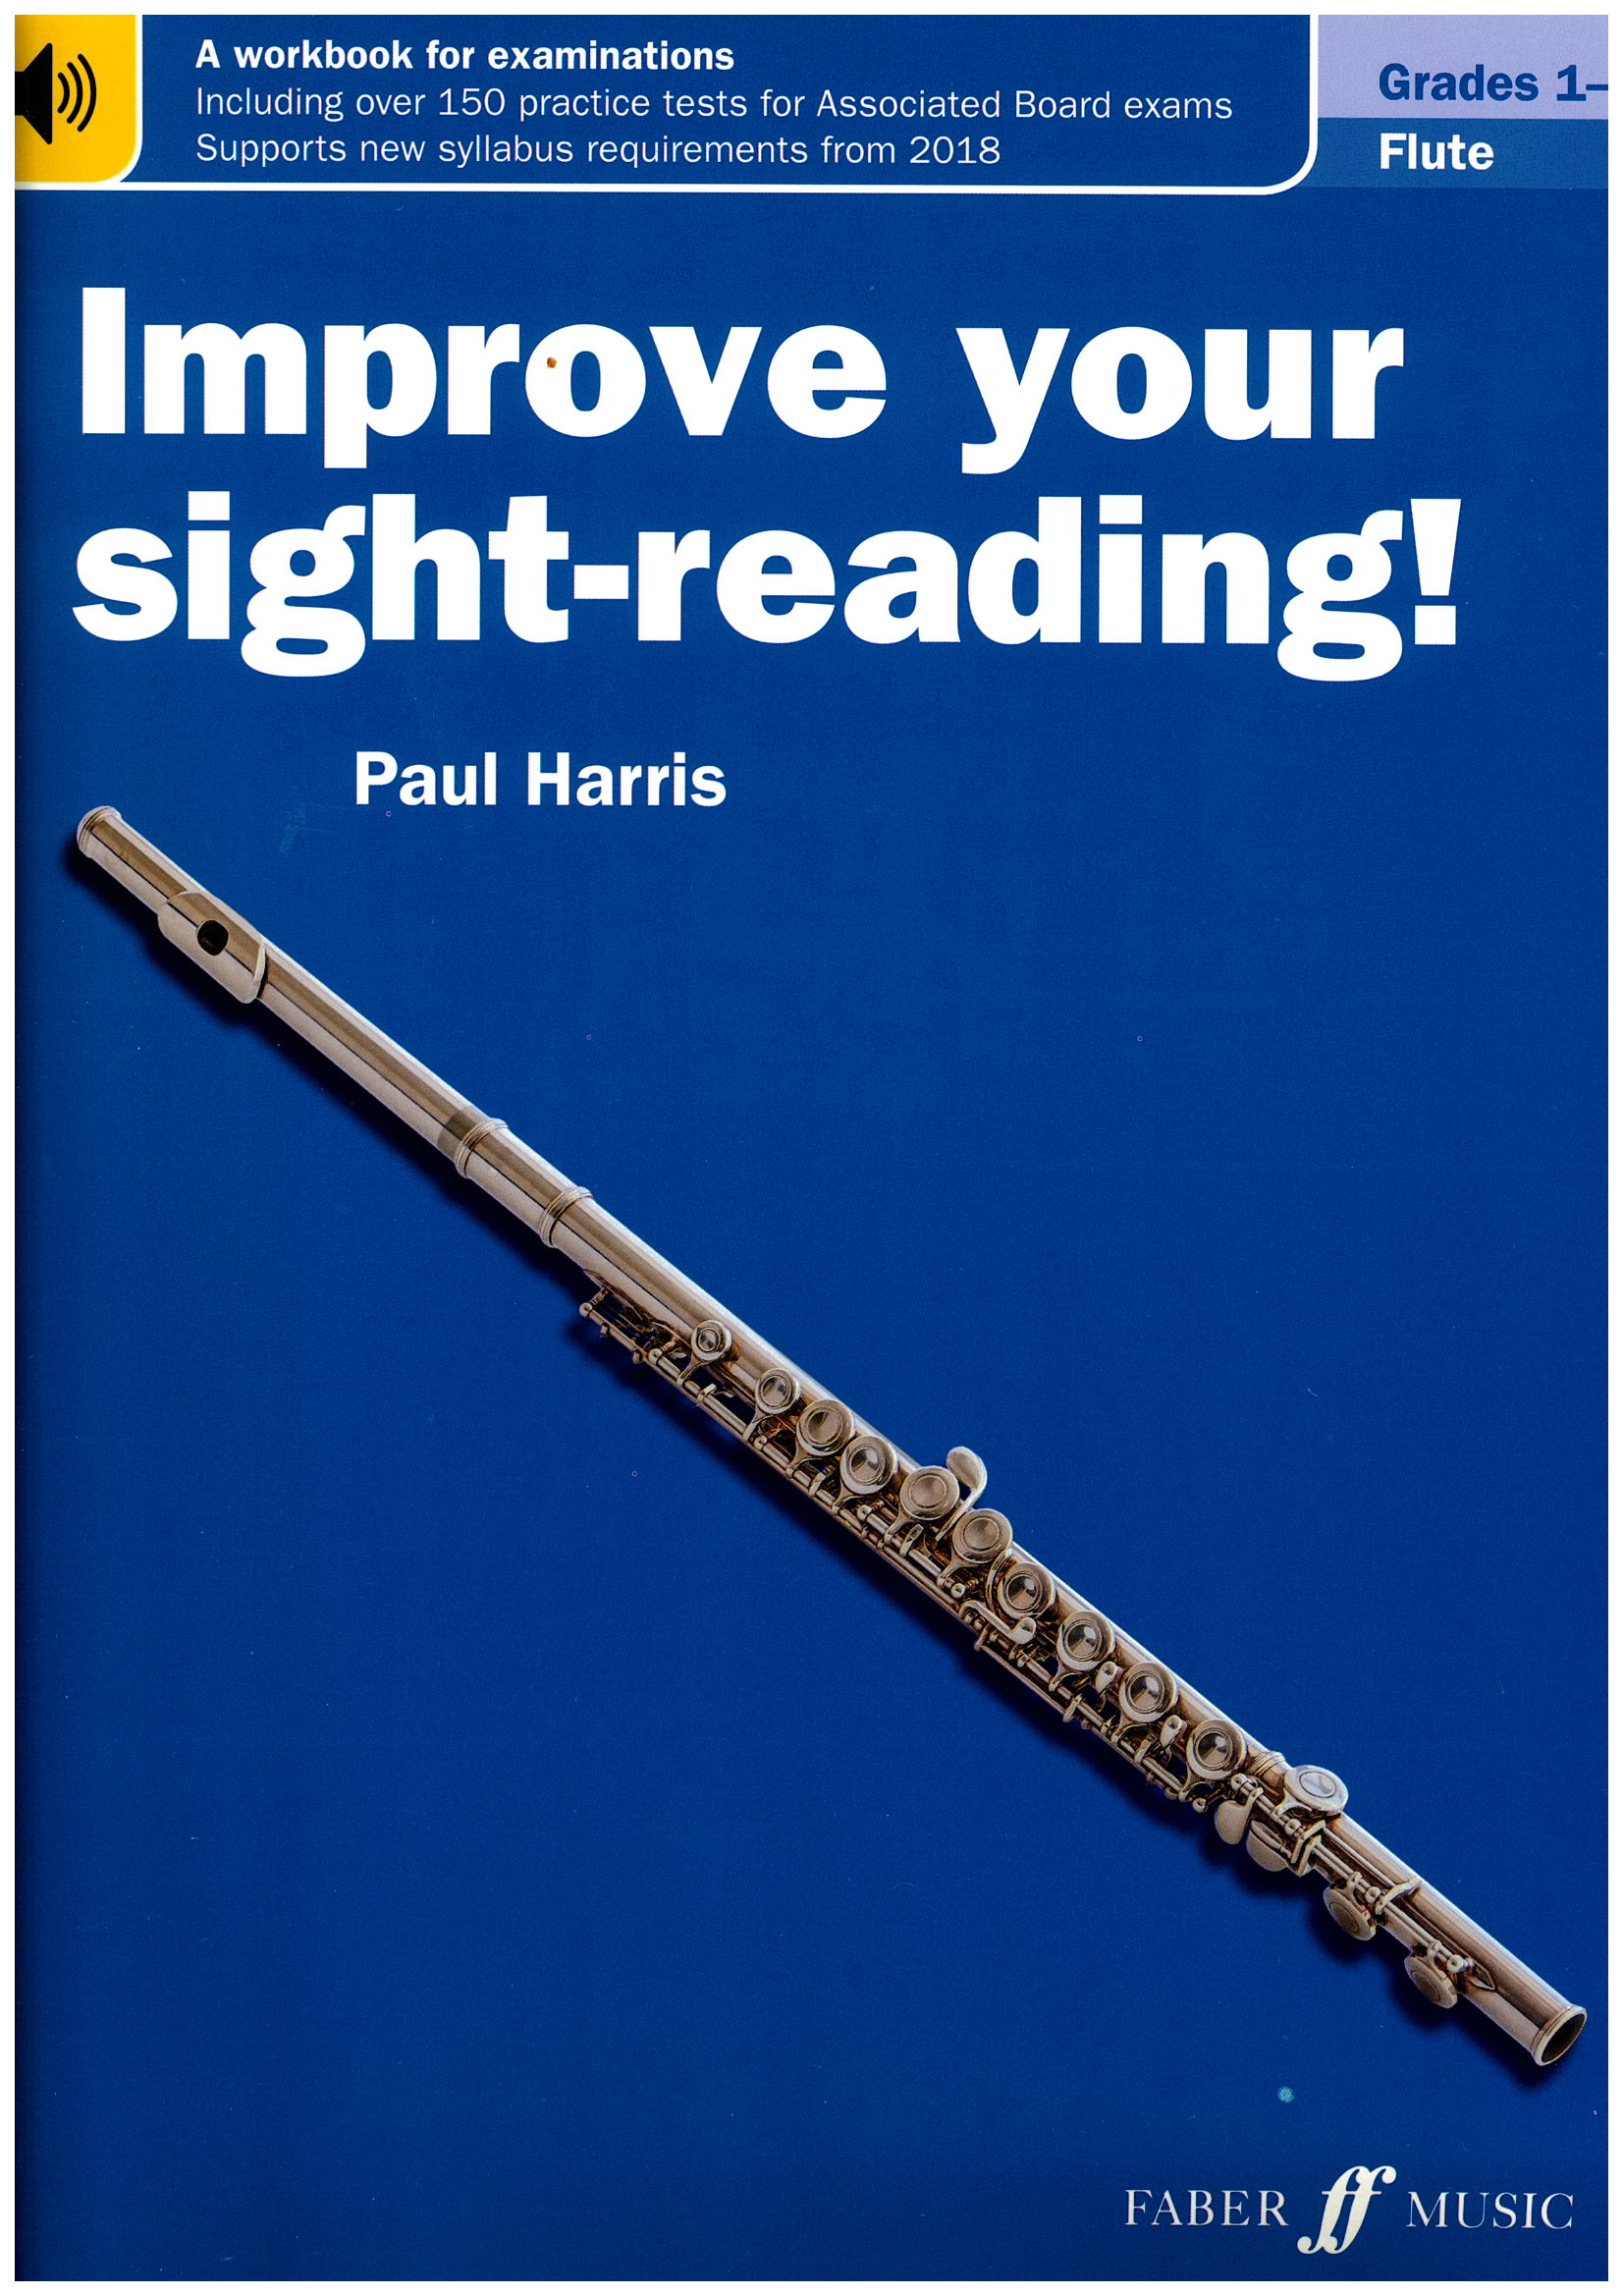 Improve your sight-reading for Flute G1-3